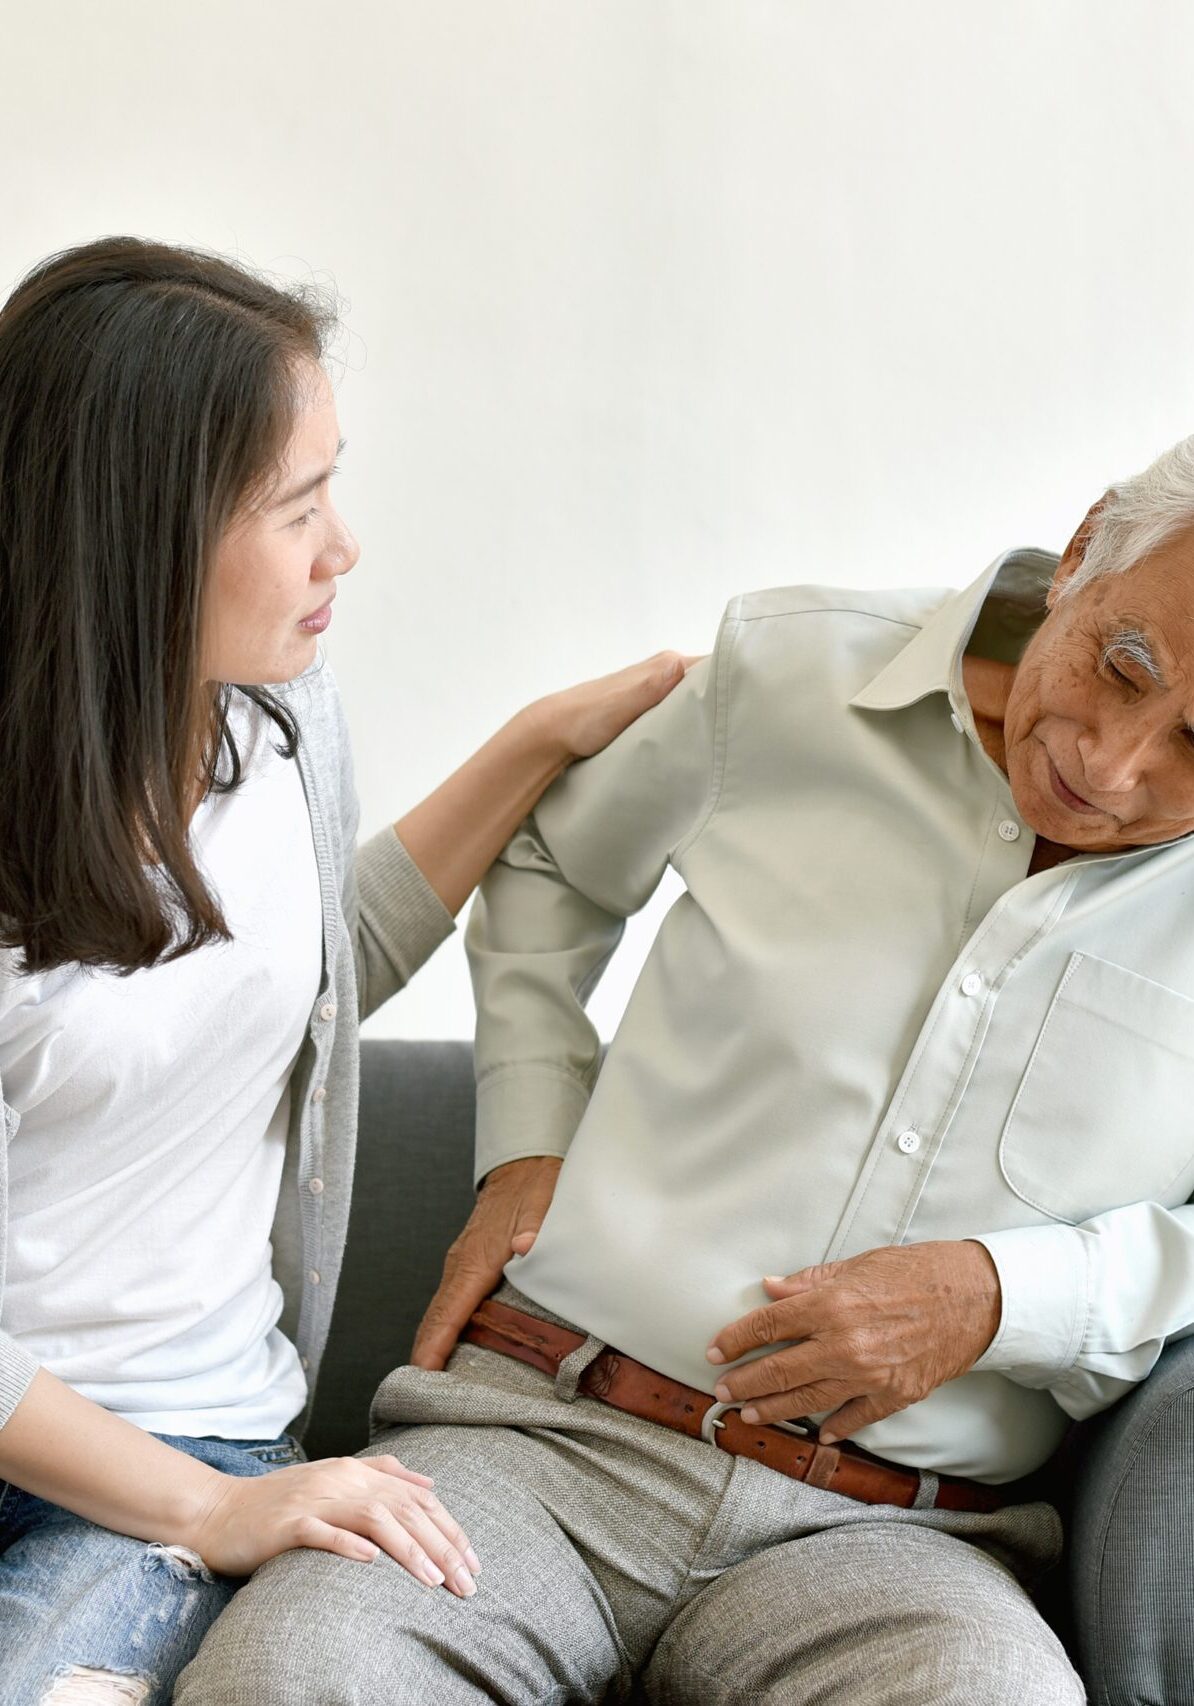 Arthritis joint pain problem in old man, Elderly asian man with hand on hip gesture, Daughter frighten and worry about her father injury symptom, Senior healthcare insurance concept.